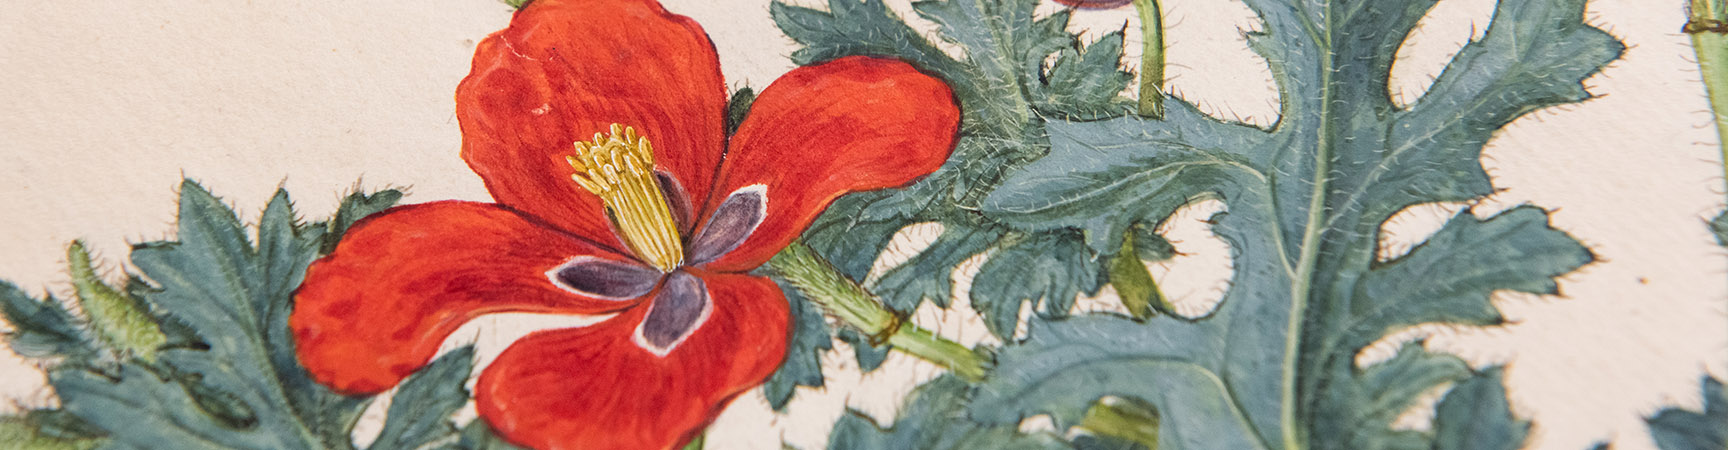 A detail of a painted flower - with red petals and a green stem